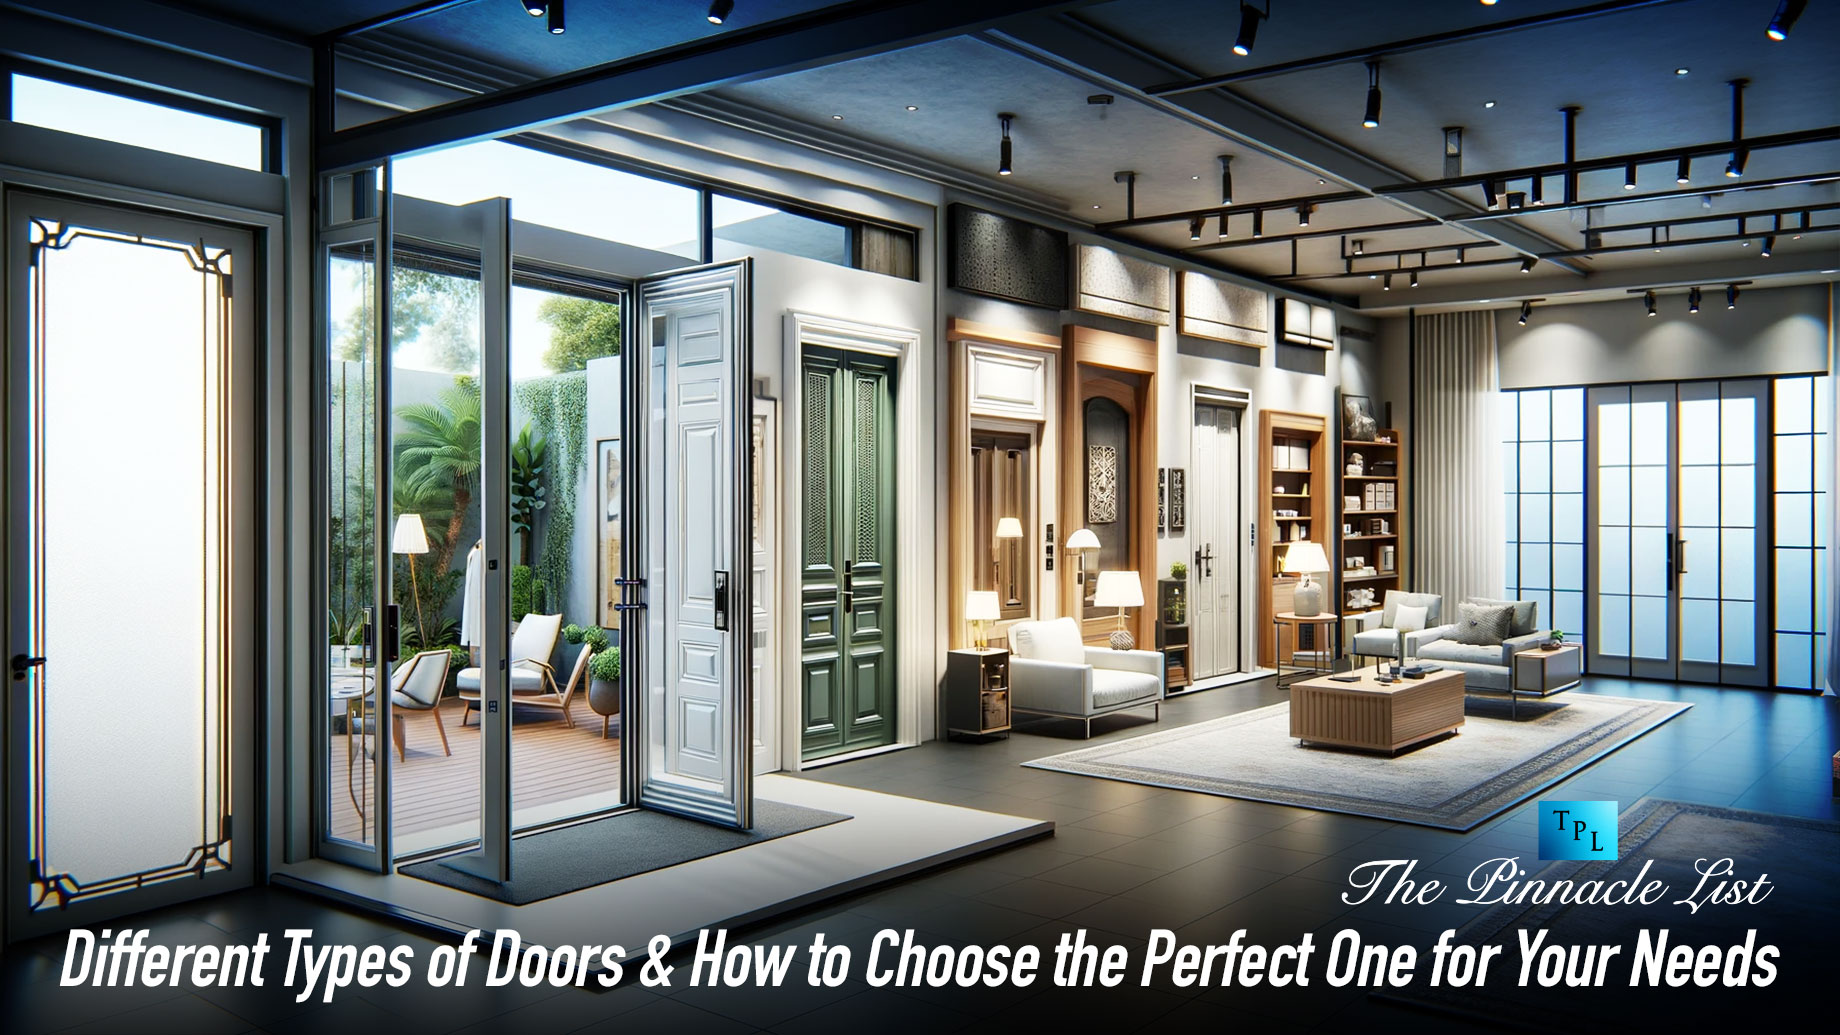 Different Types of Doors & How to Choose the Perfect One for Your Needs